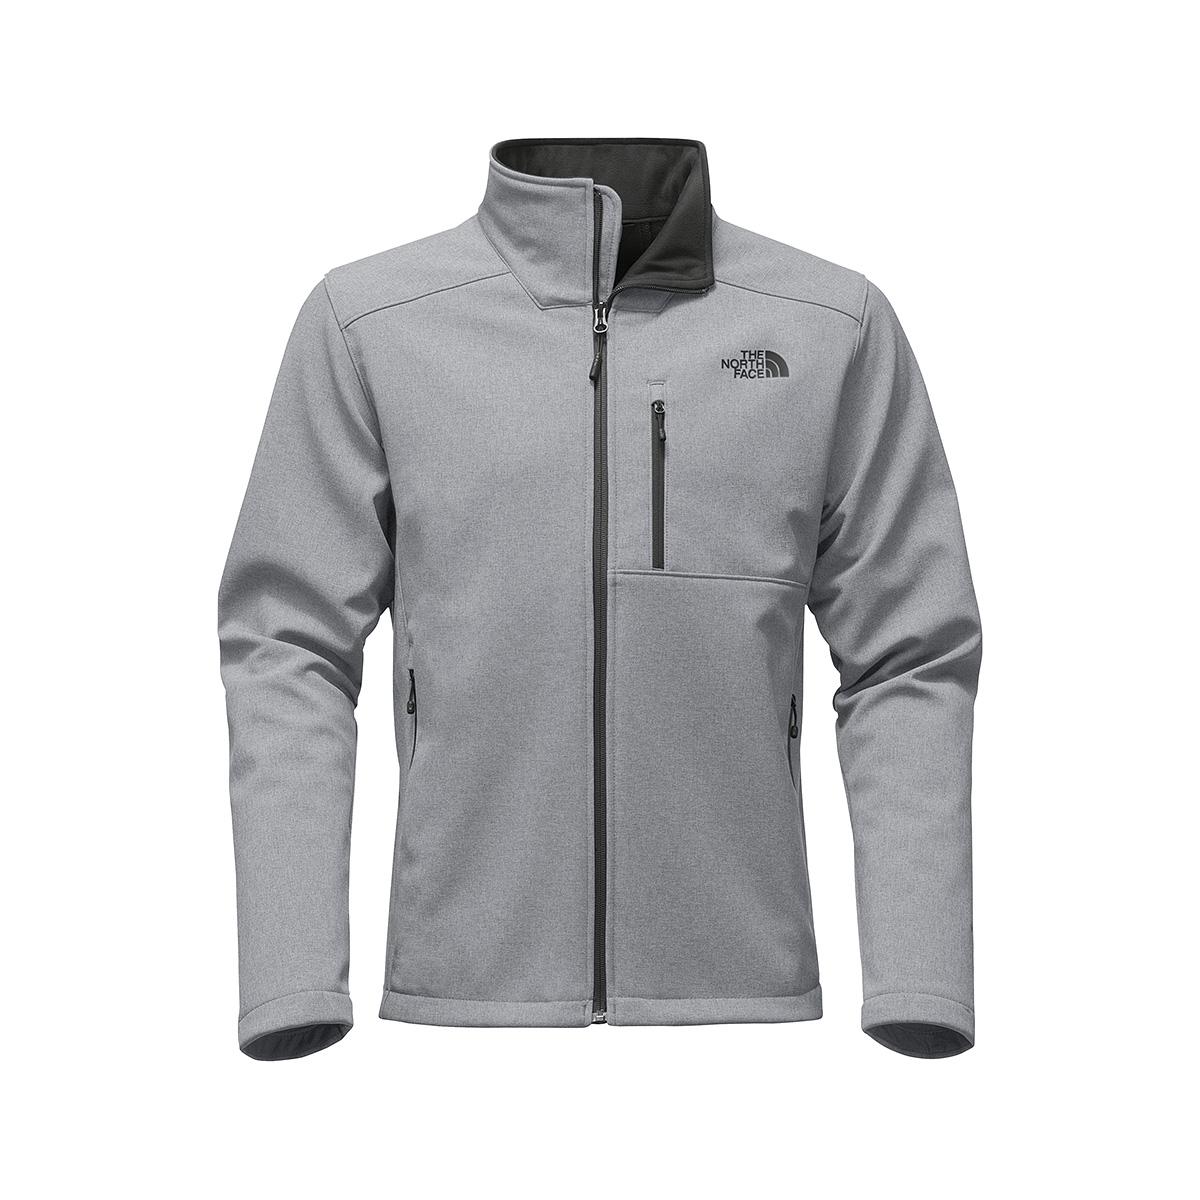 THE NORTH FACE | Men's Apex Bionic 2 Jacket | Mast General Store